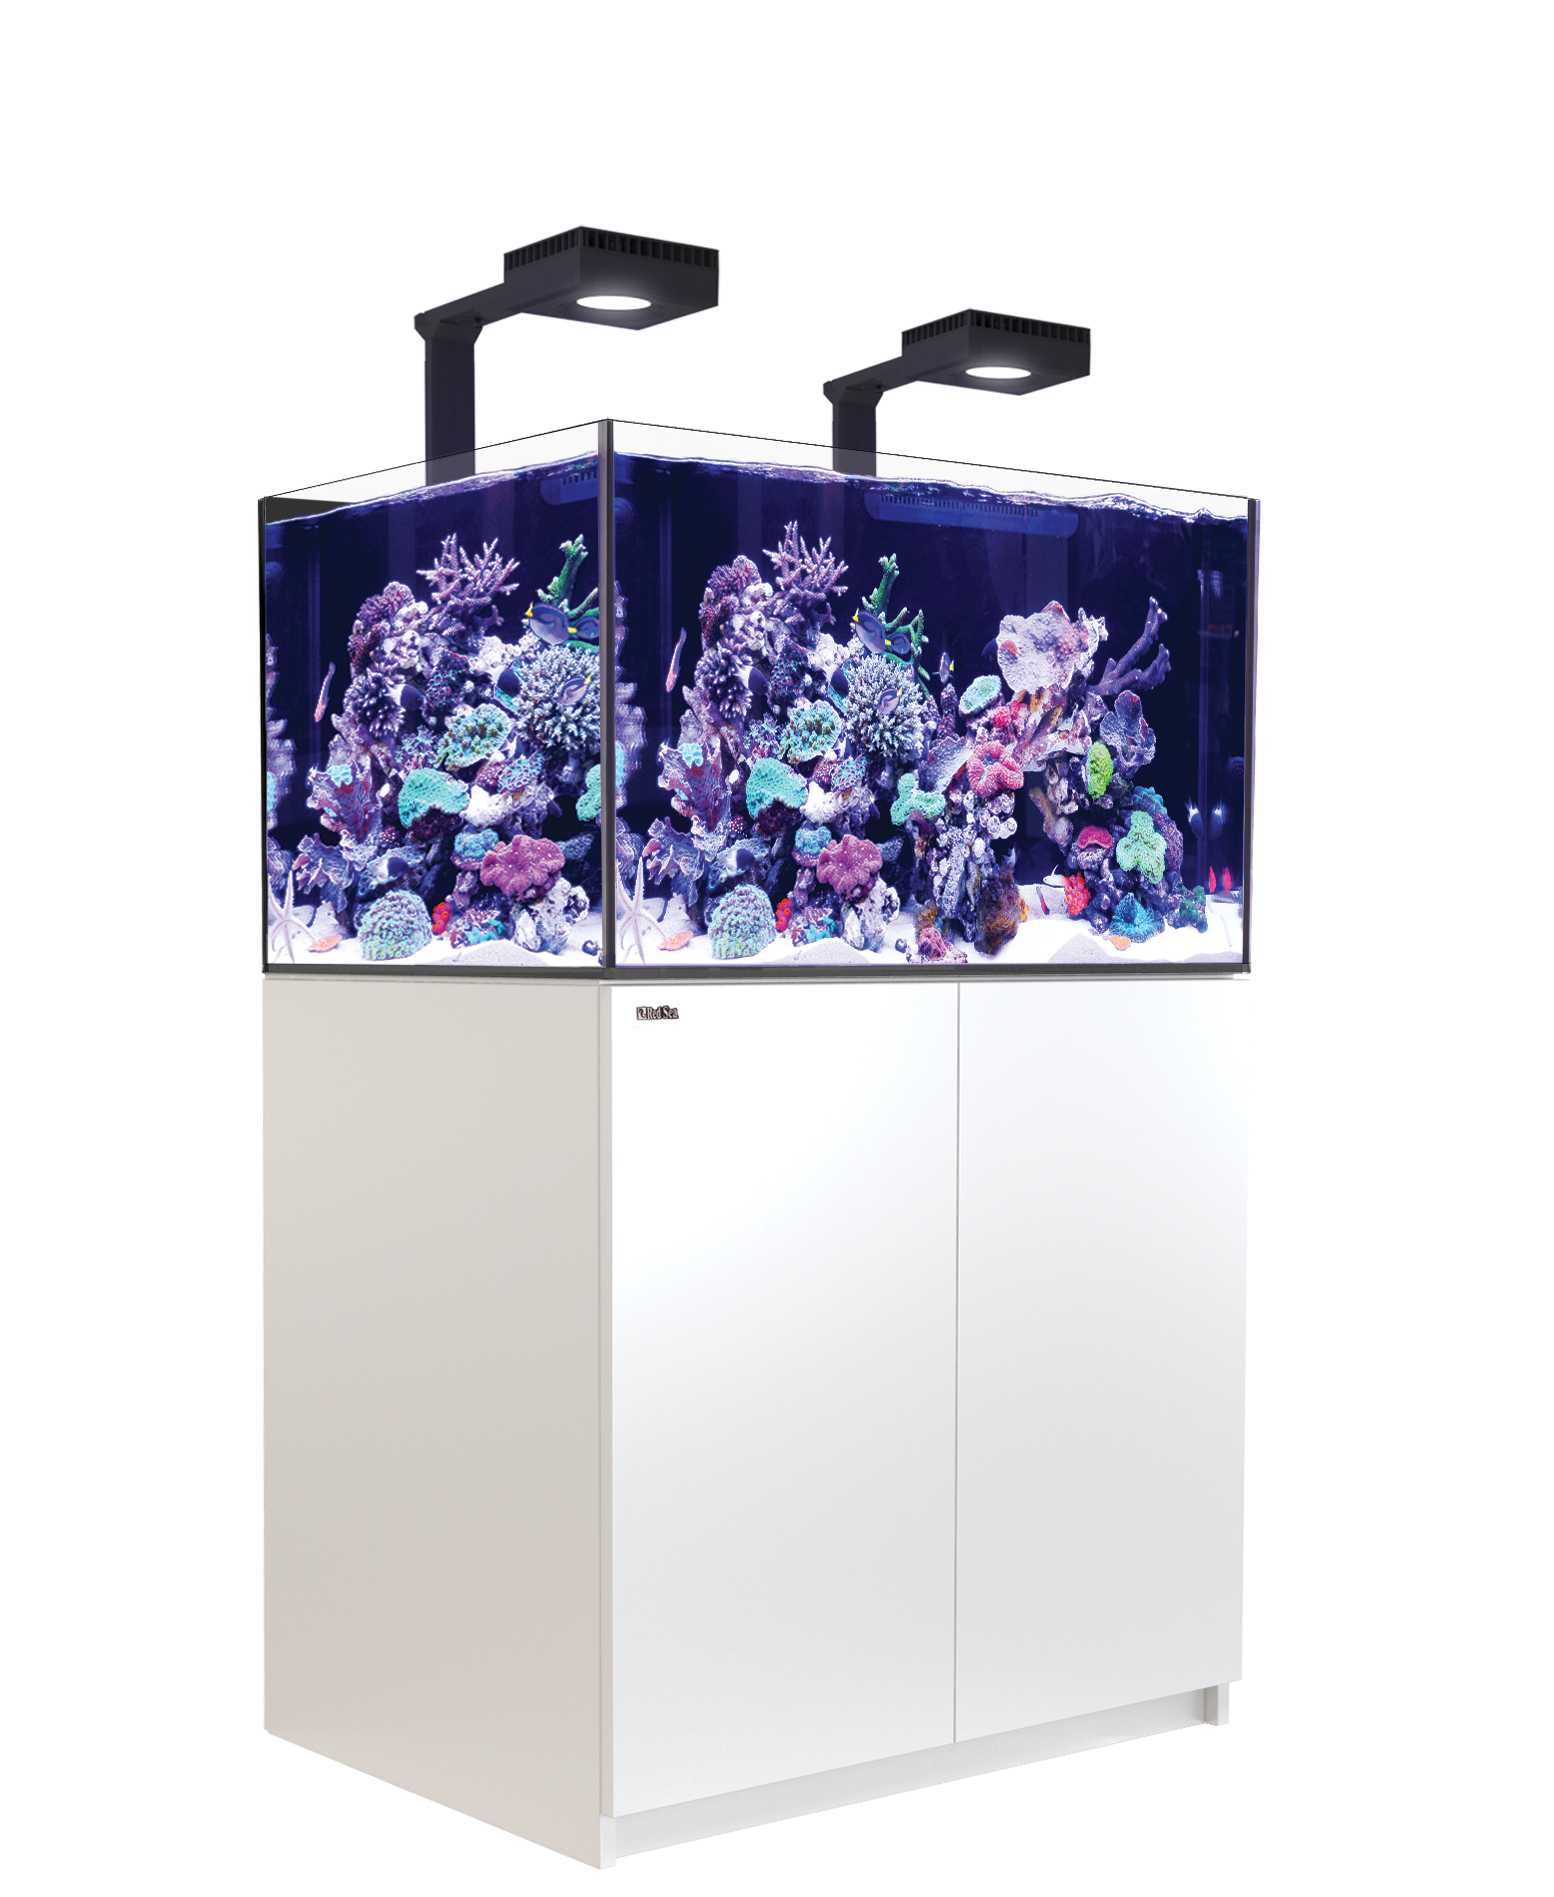 Red Sea REEFER XL-300 Deluxe System Weiss 2 ReefLed 90 + Halterung